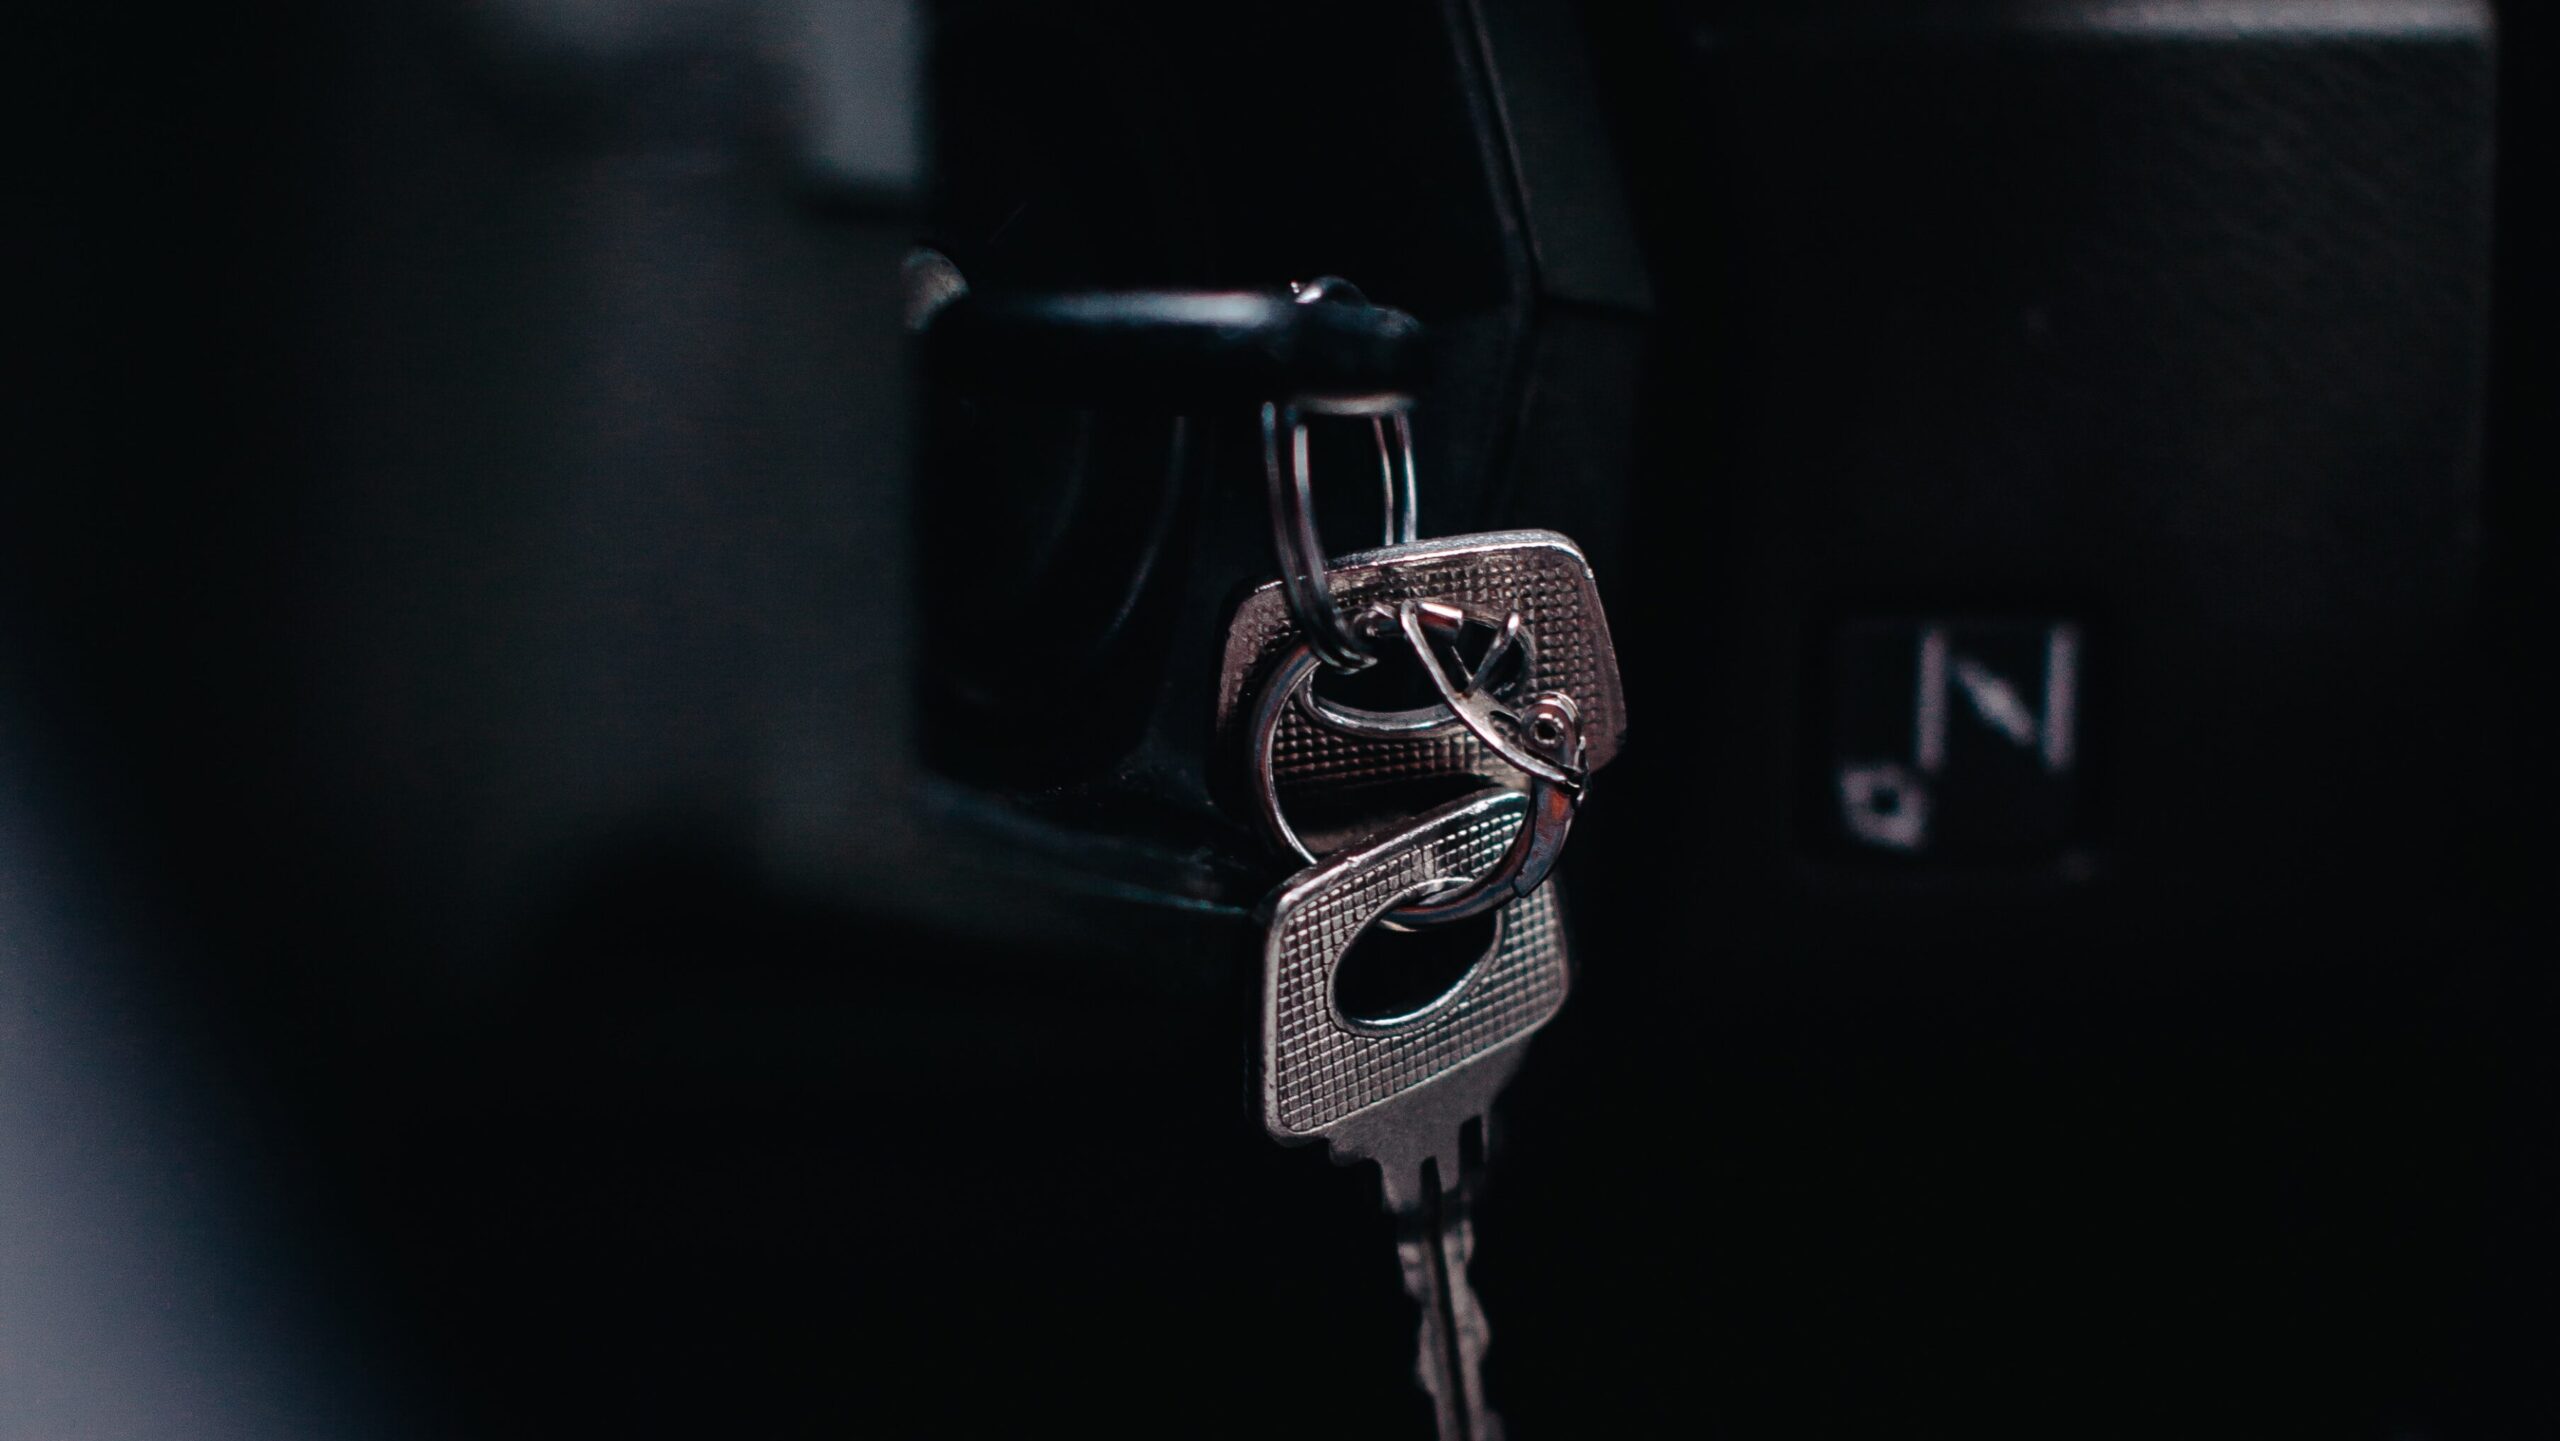 Photo of keys in the ignition of a parked car